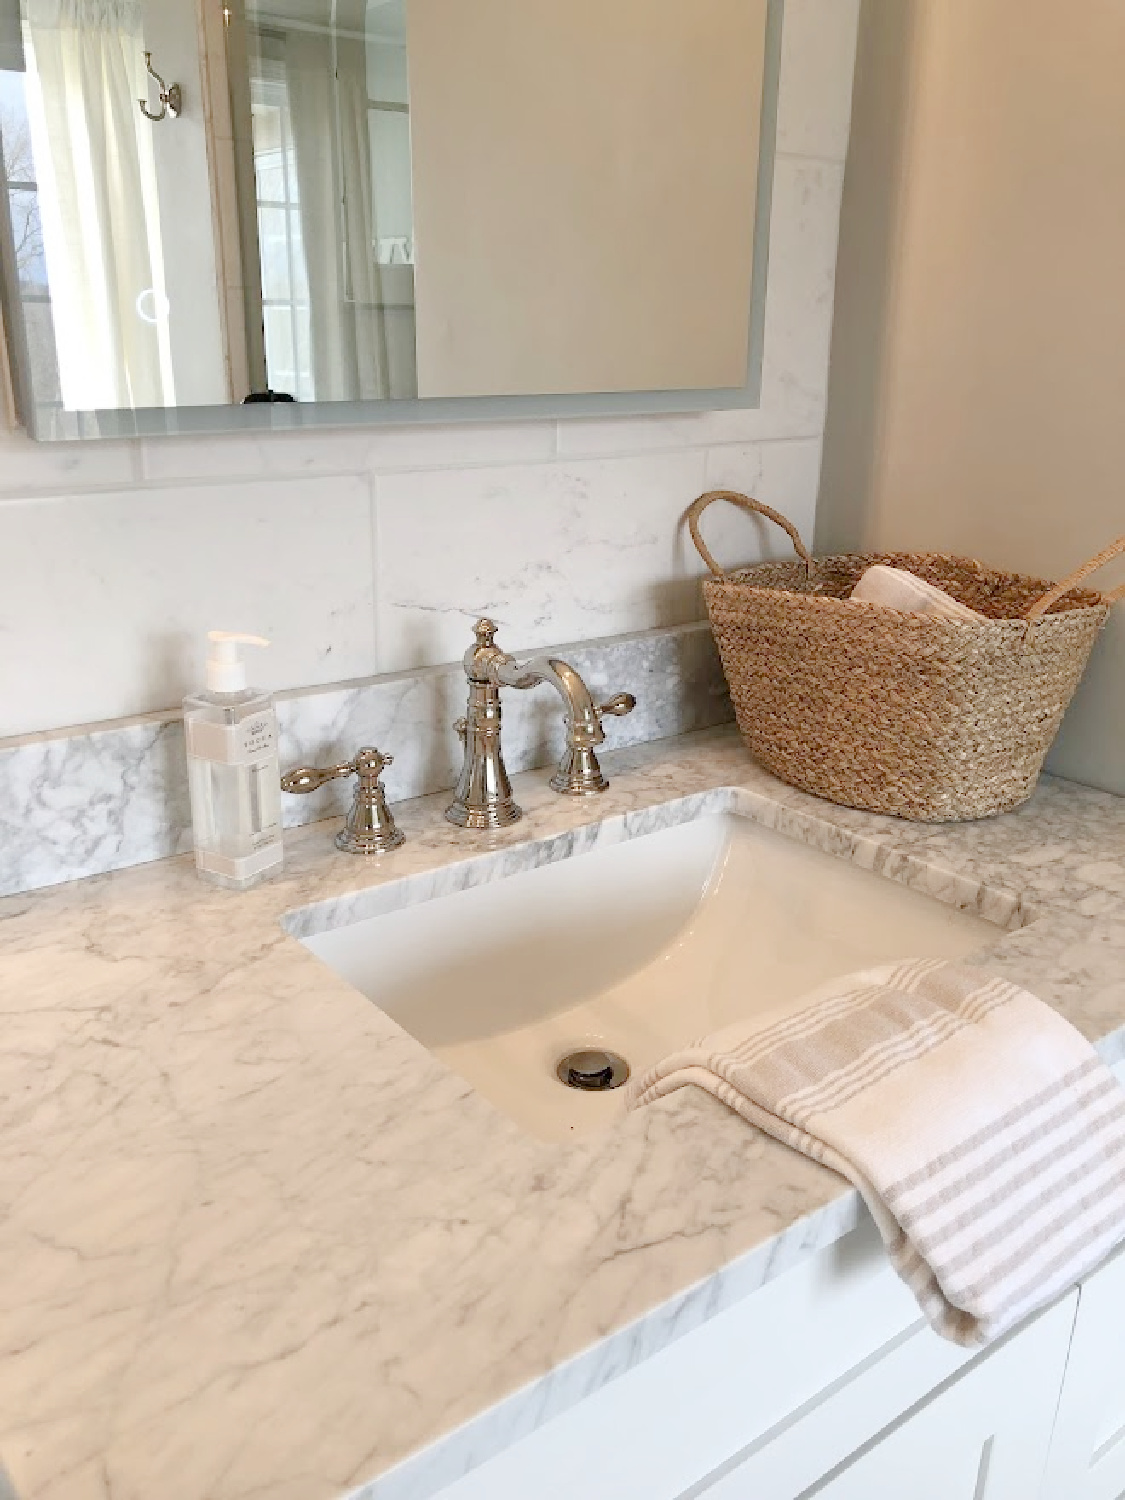 Modern LED medicine cabinet, carrera marble topped vanity, and Edwardian polished nickel faucet in our modern French renovated bath at the Georgian - Hello Lovely Studio.